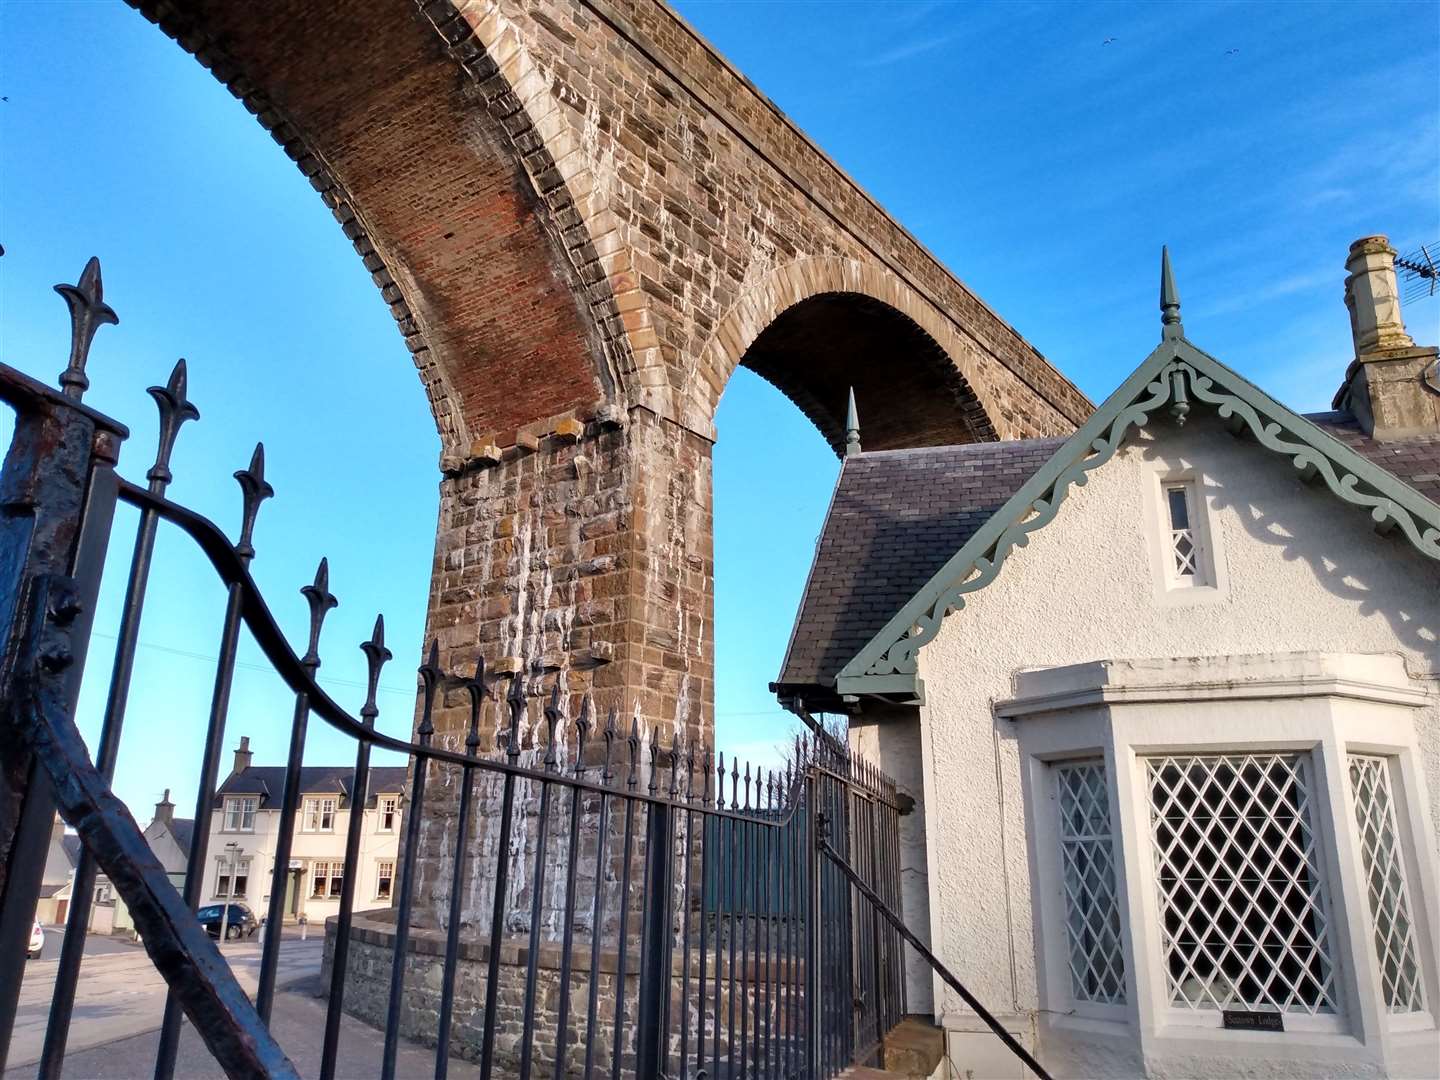 The gatehouse below the viaduct.